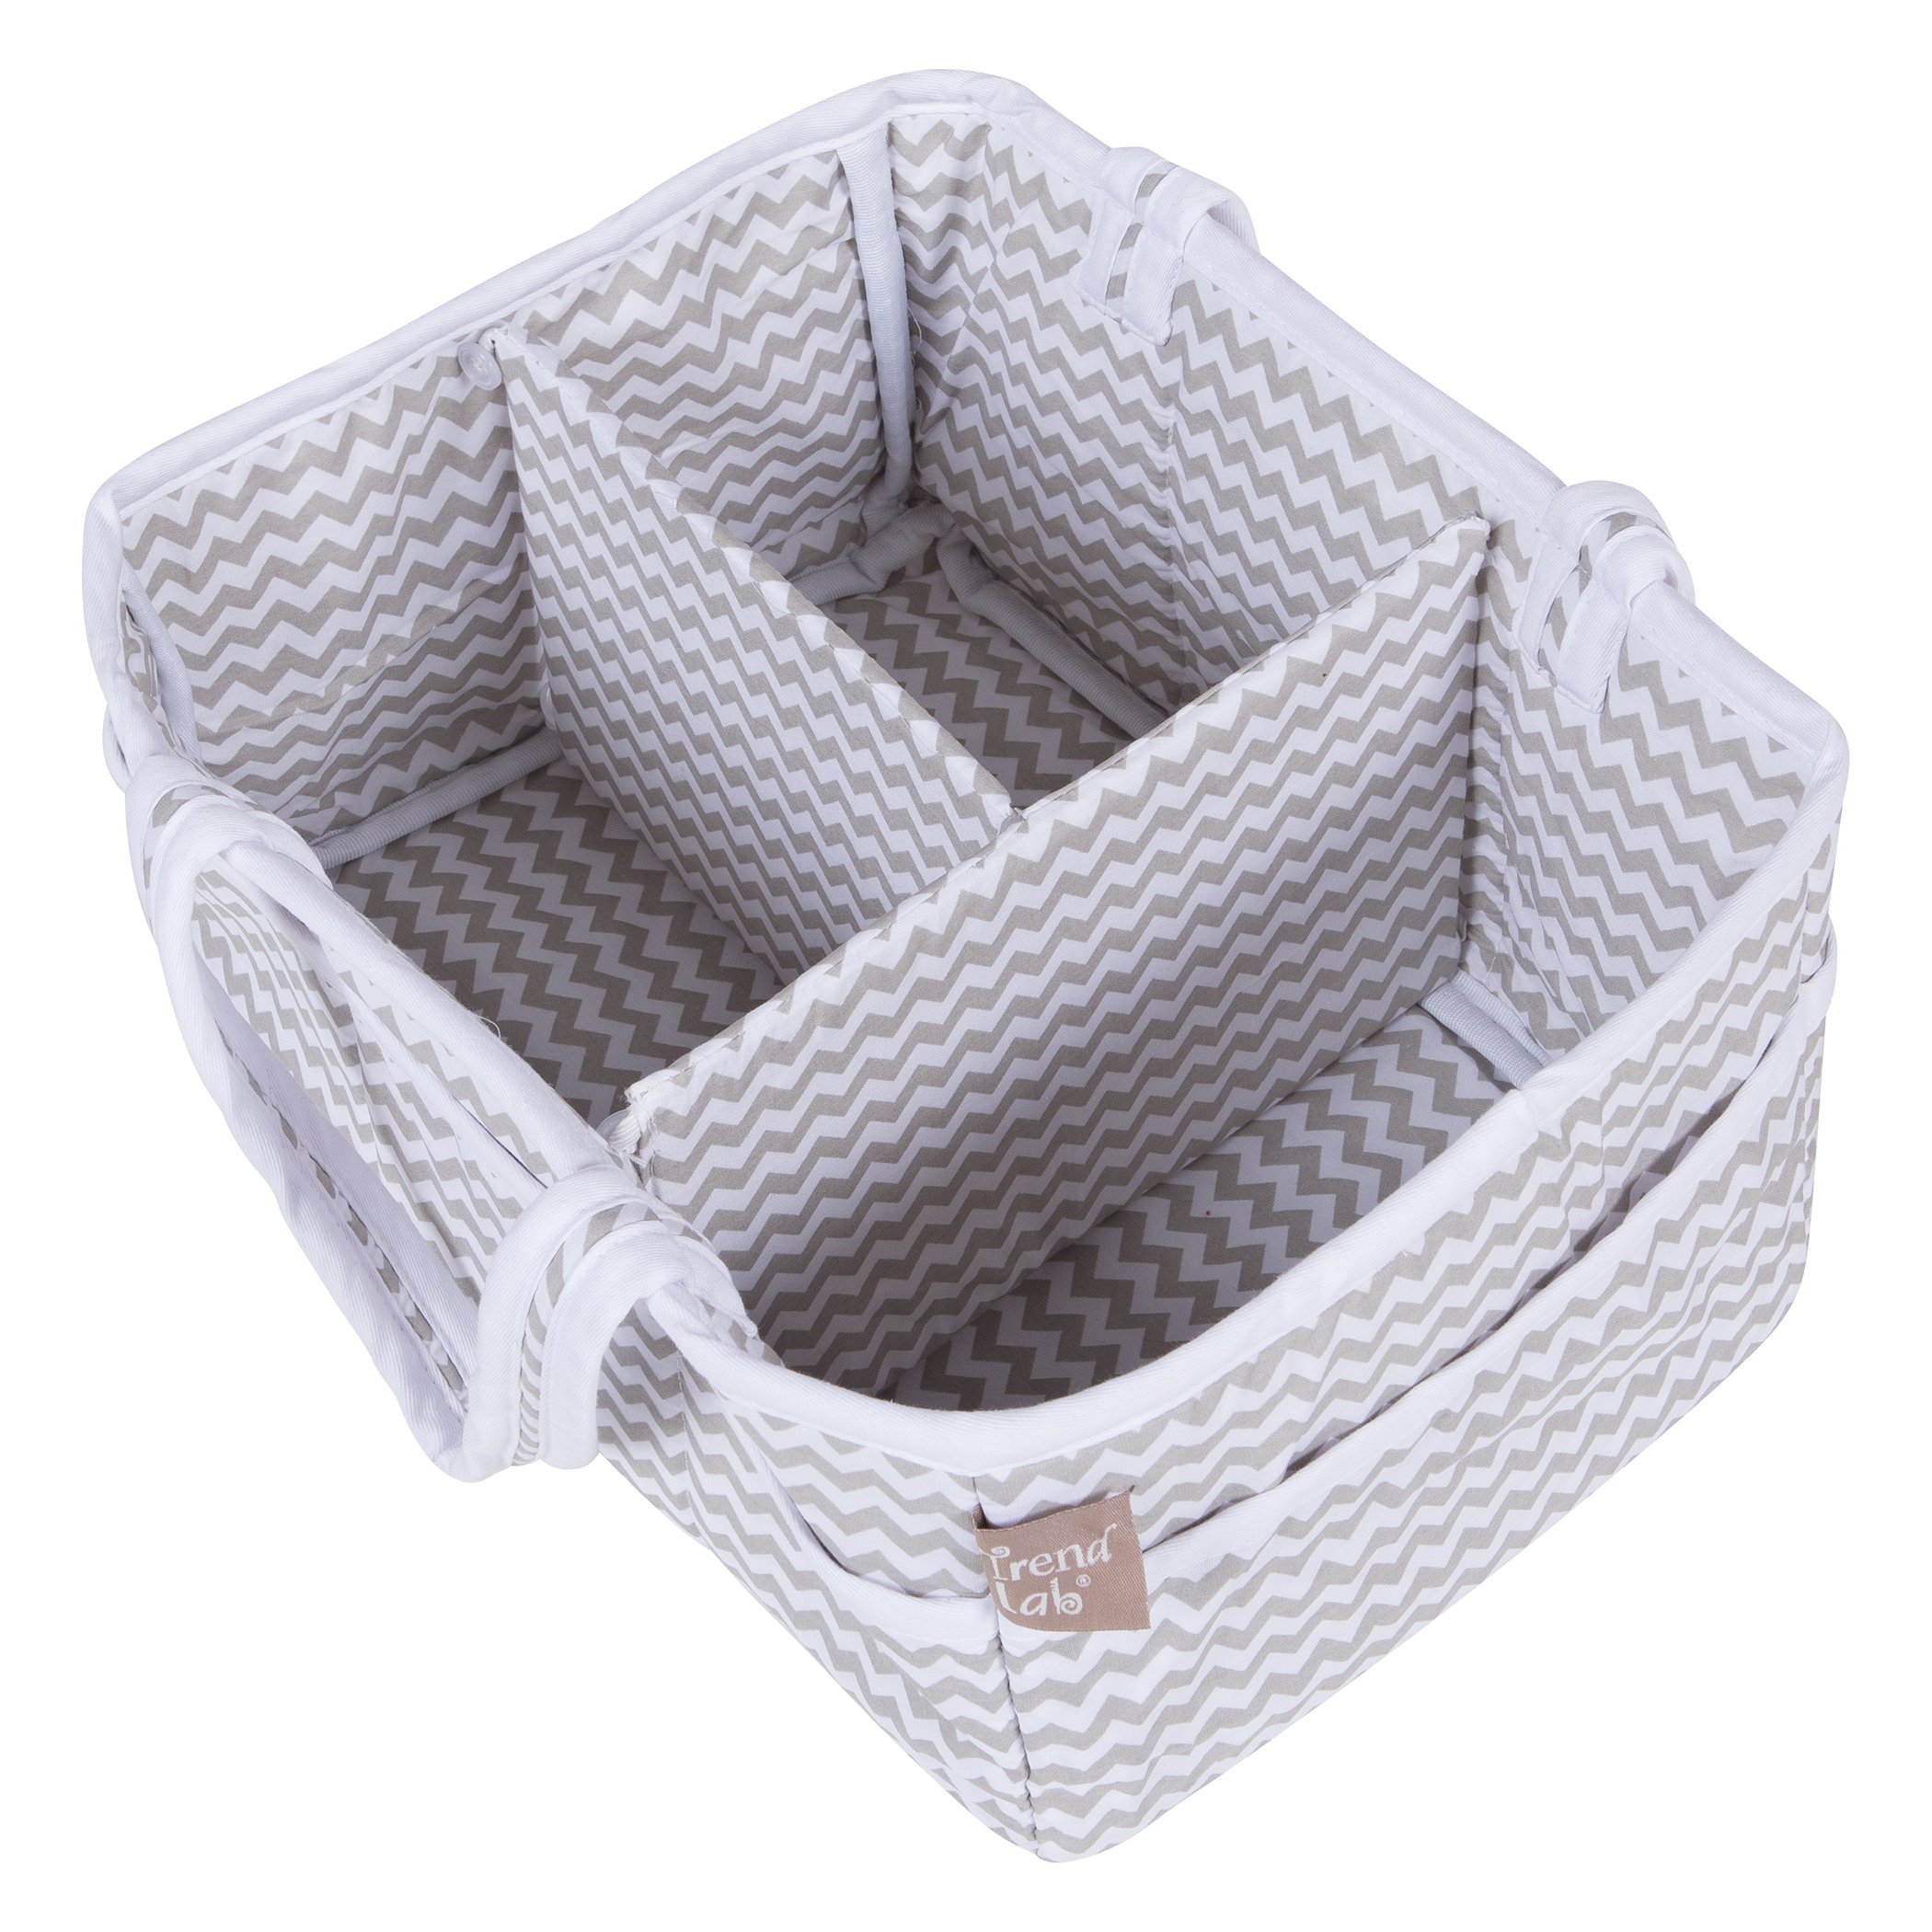 Trend Lab Dove Gray Chevron Storage Caddy Diaper Organizer for Baby Nursery and Changing Table Accessories, 12 in x 6 in x 8 in (Pack of 2)